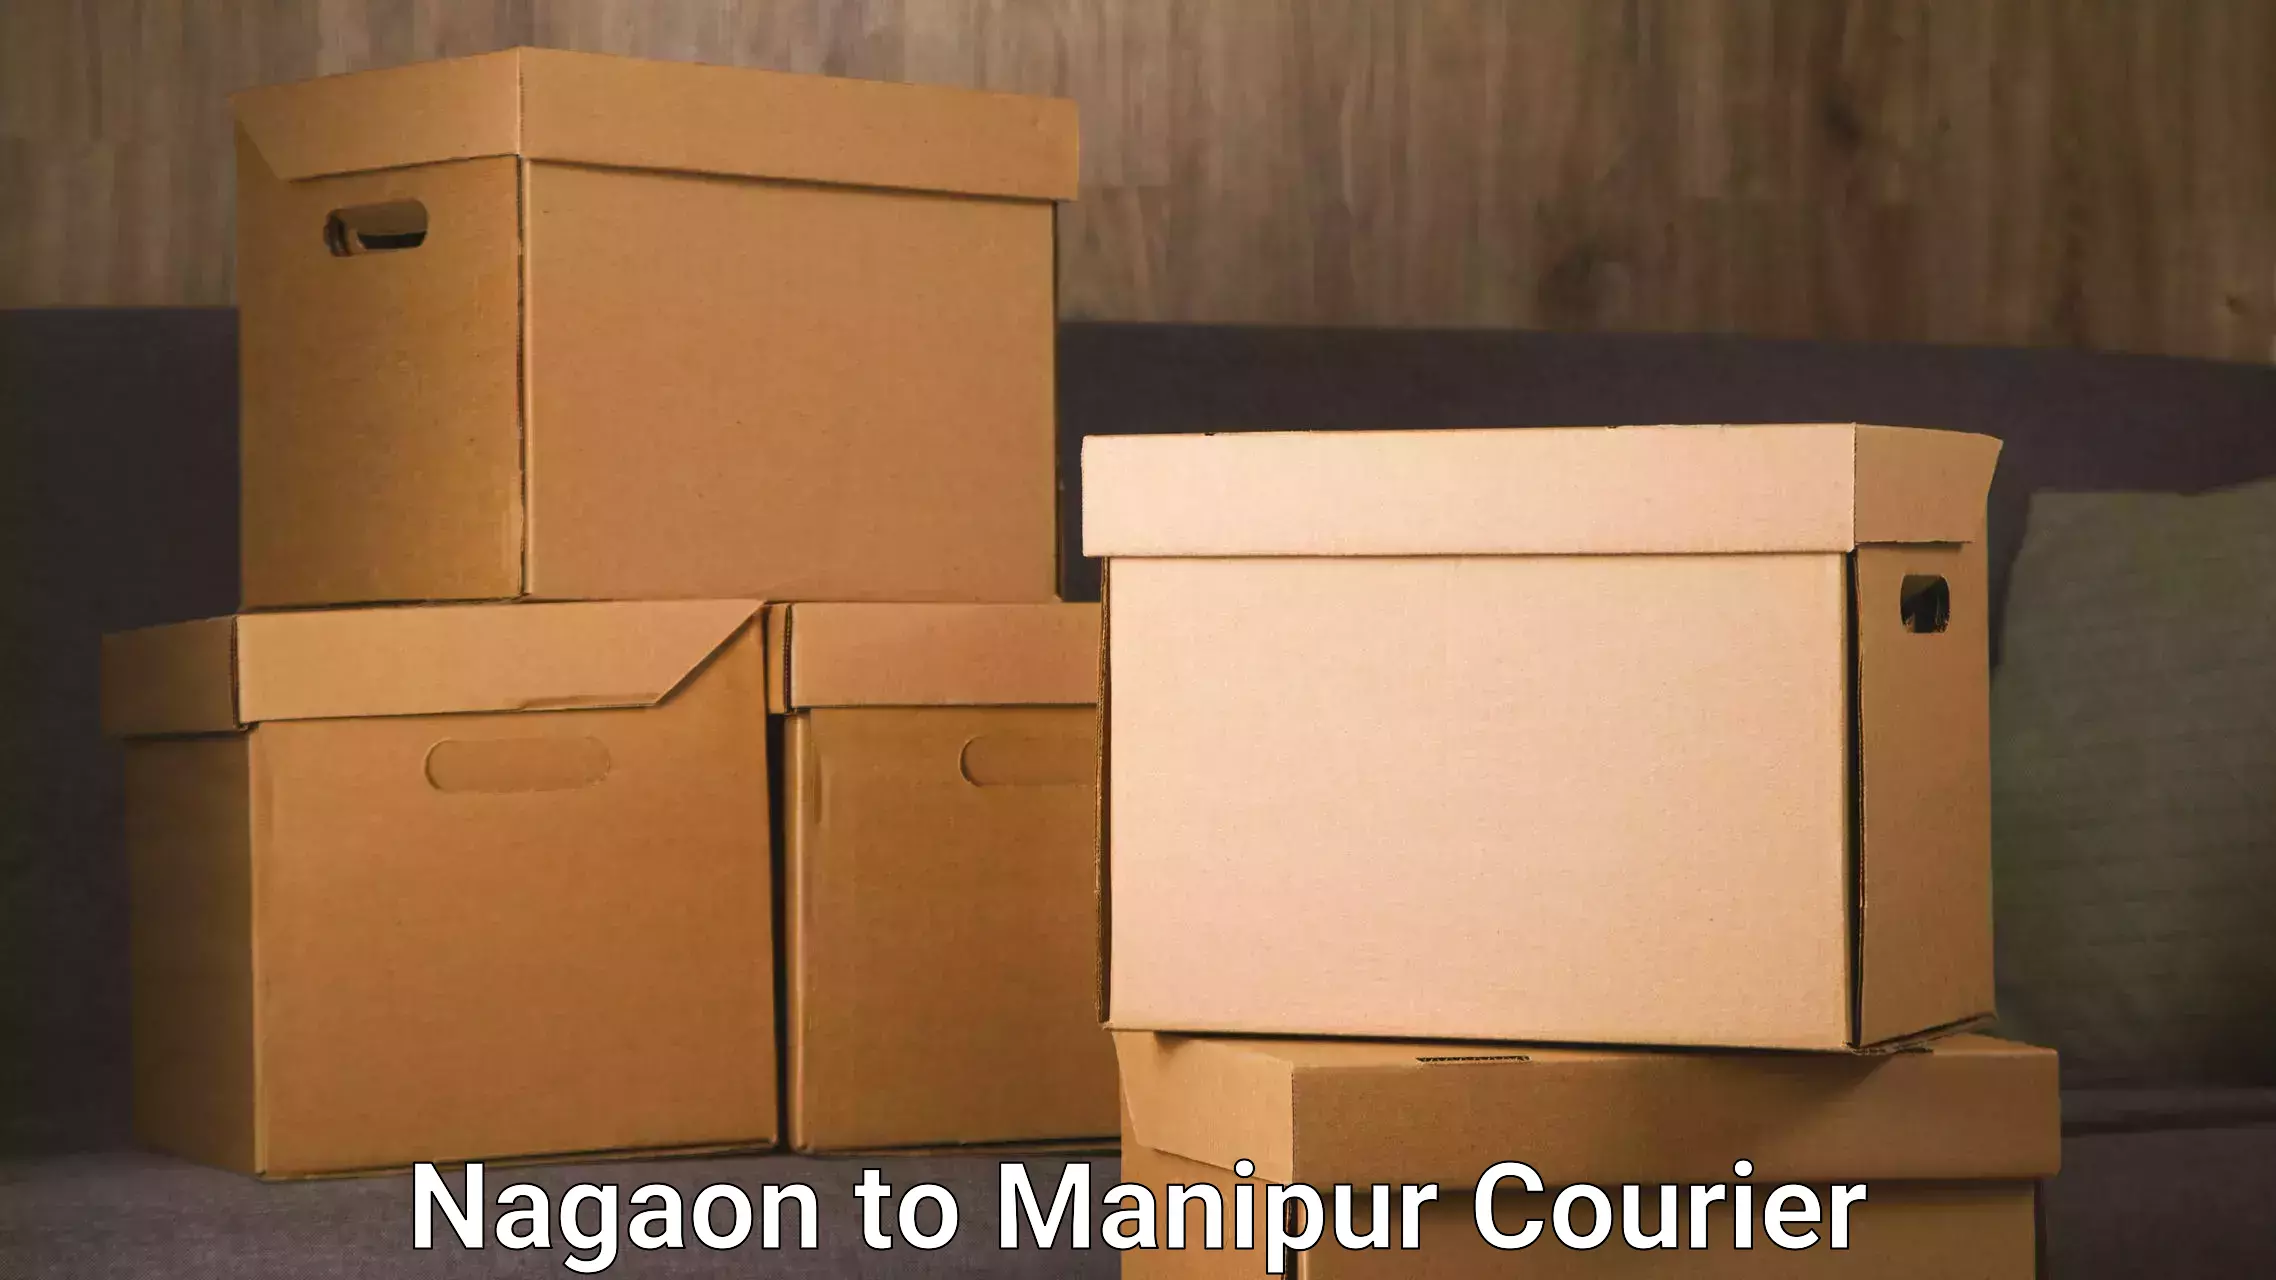 Enhanced tracking features Nagaon to Manipur